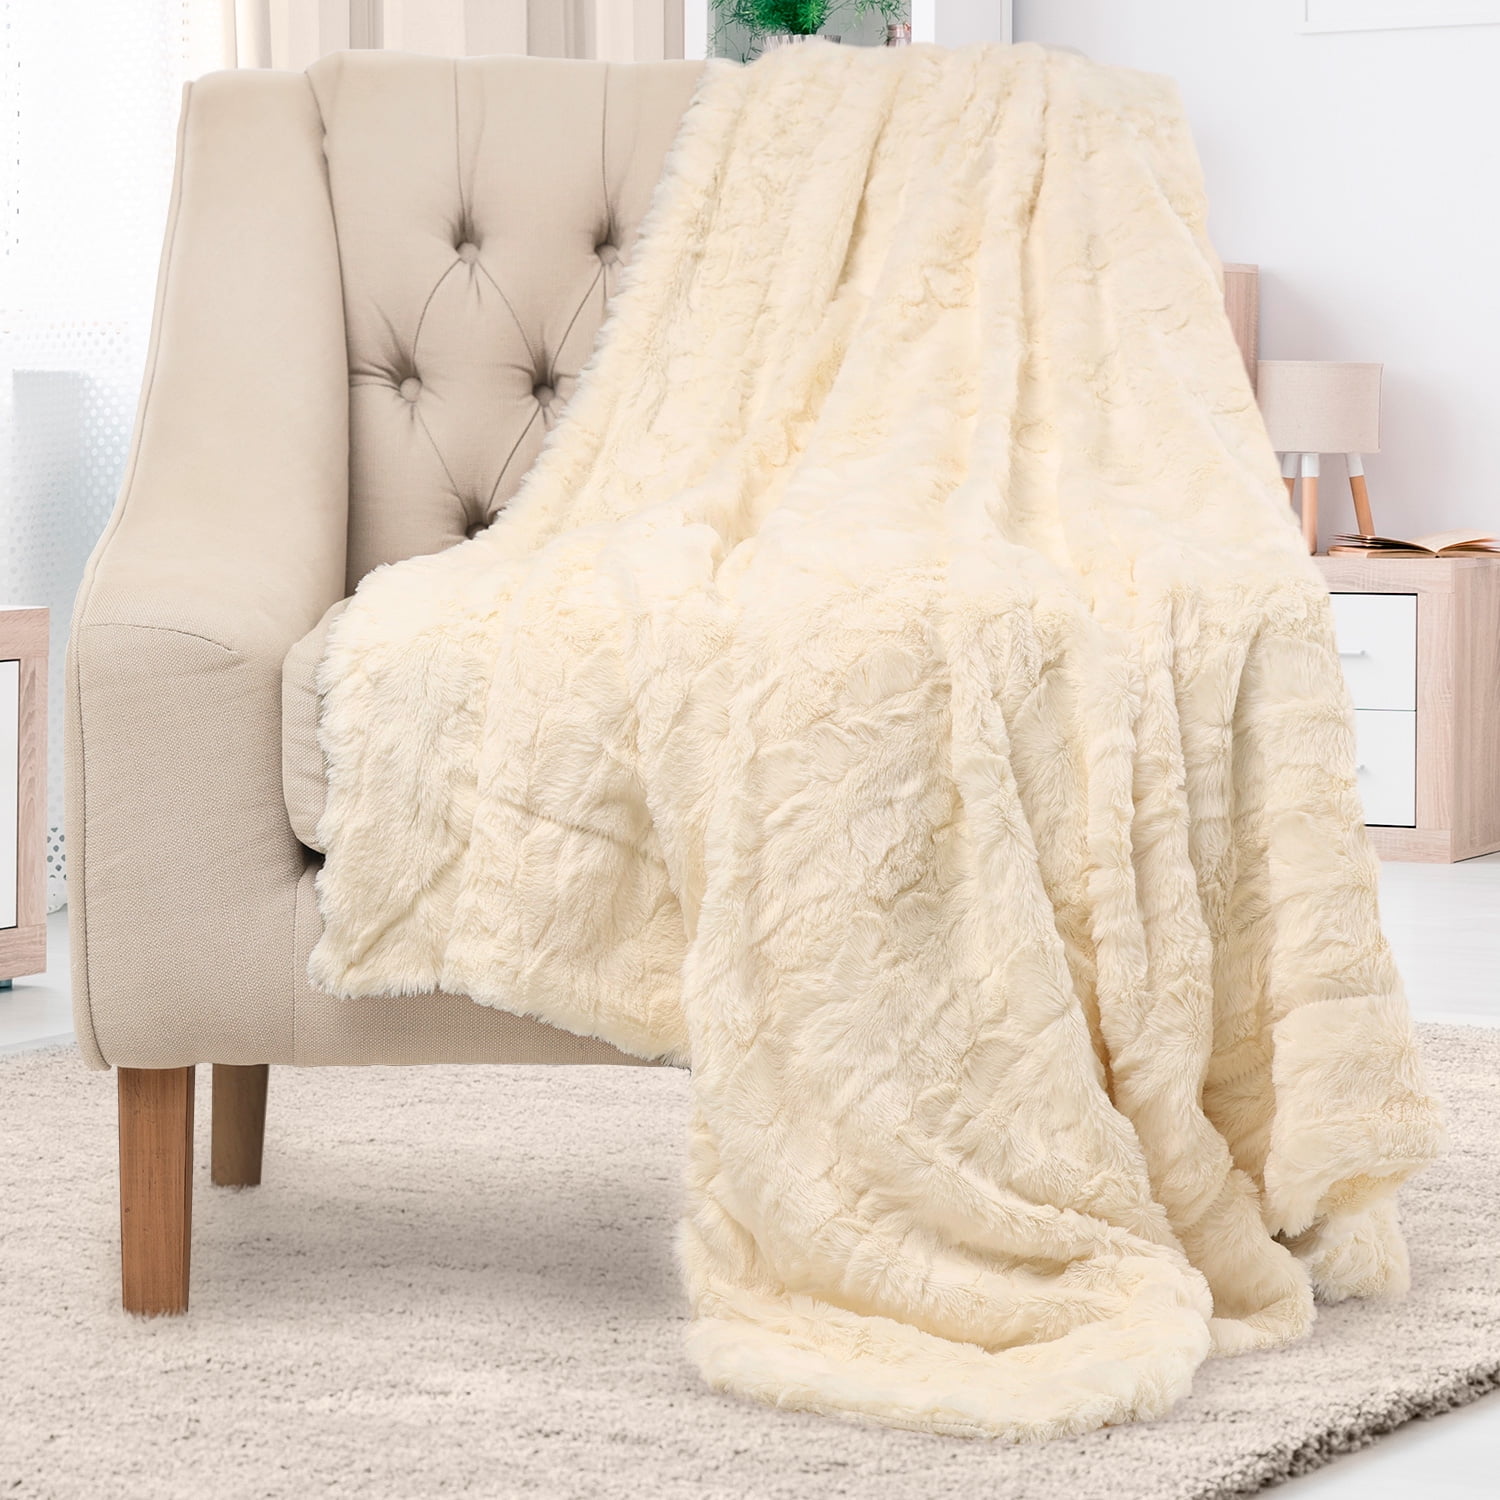 New Warm 40" x 50" Lambswool Blanket Winter Bed Couch Bedroom Throws 